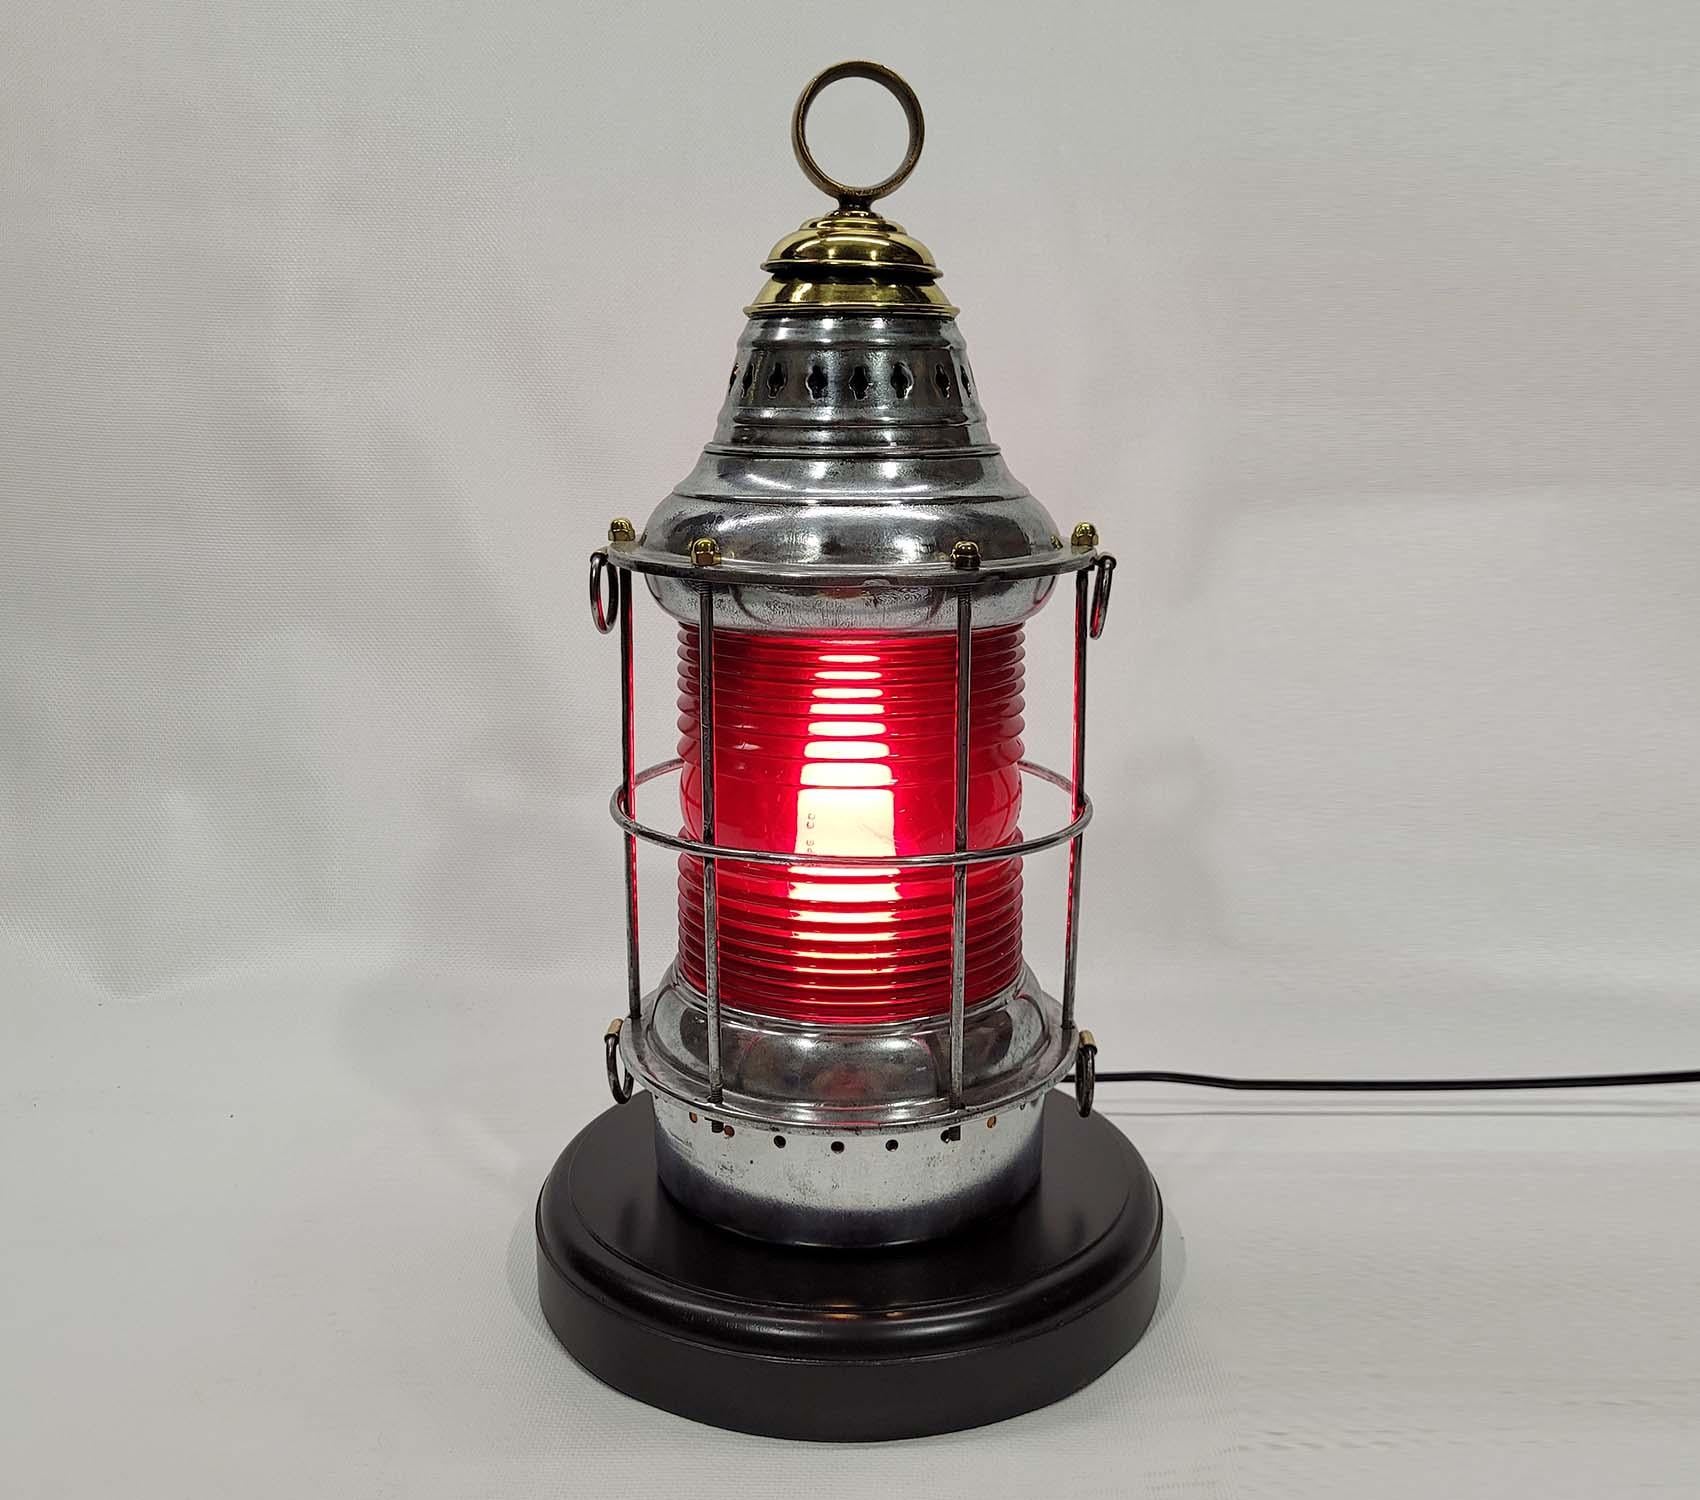 Polished Steel Ships Lantern with Ruby Red Lens In Good Condition For Sale In Norwell, MA